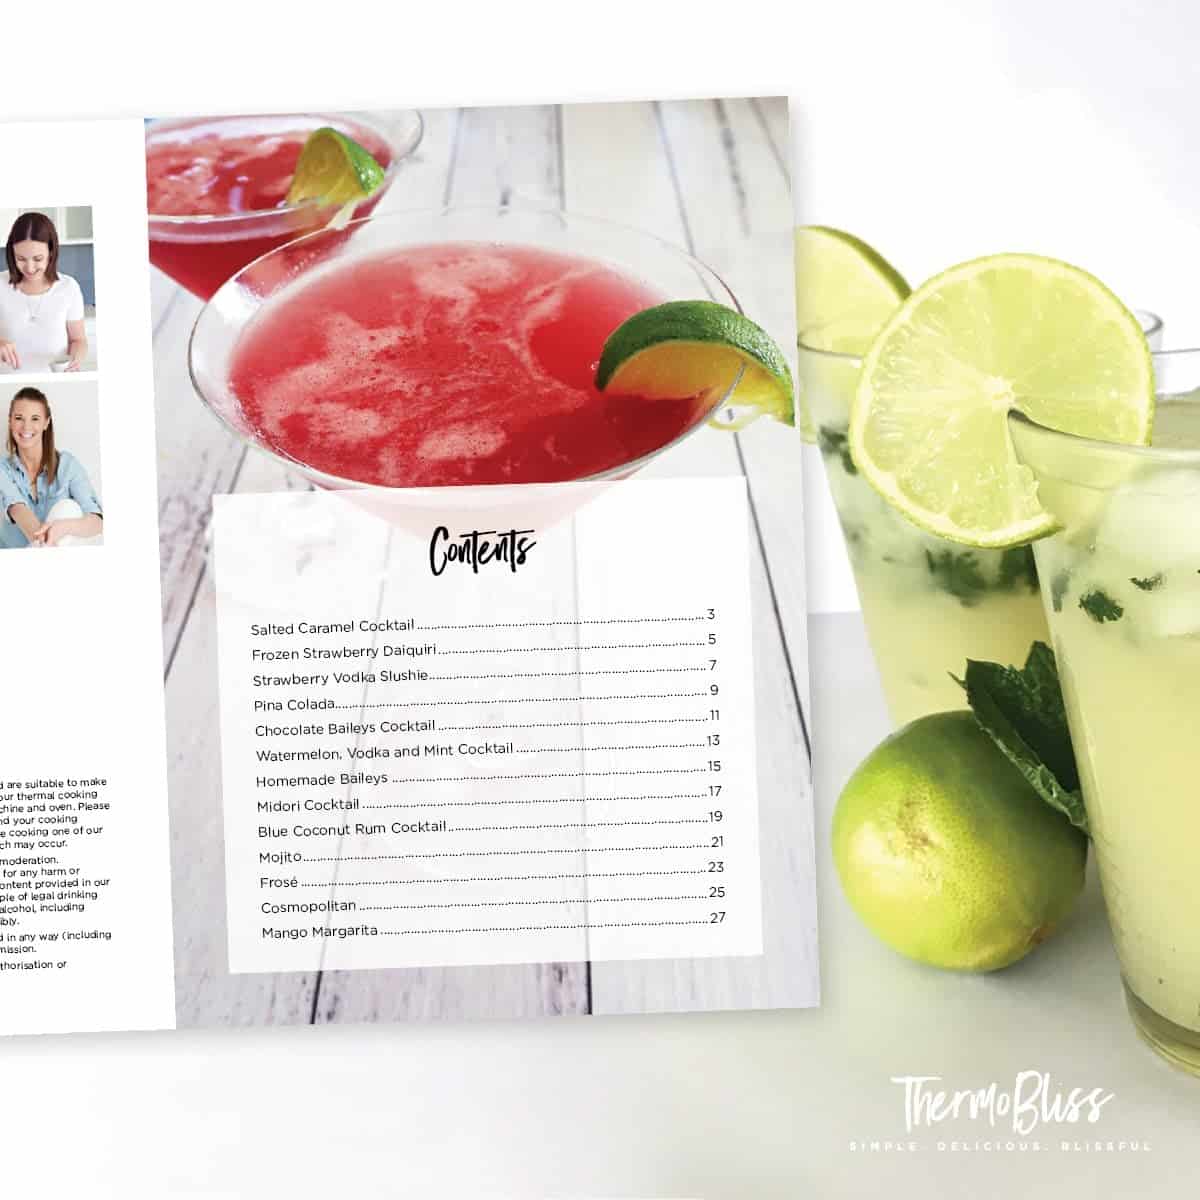 Image of the contents page from the ThermoBliss Cocktails cookbook volume 1.